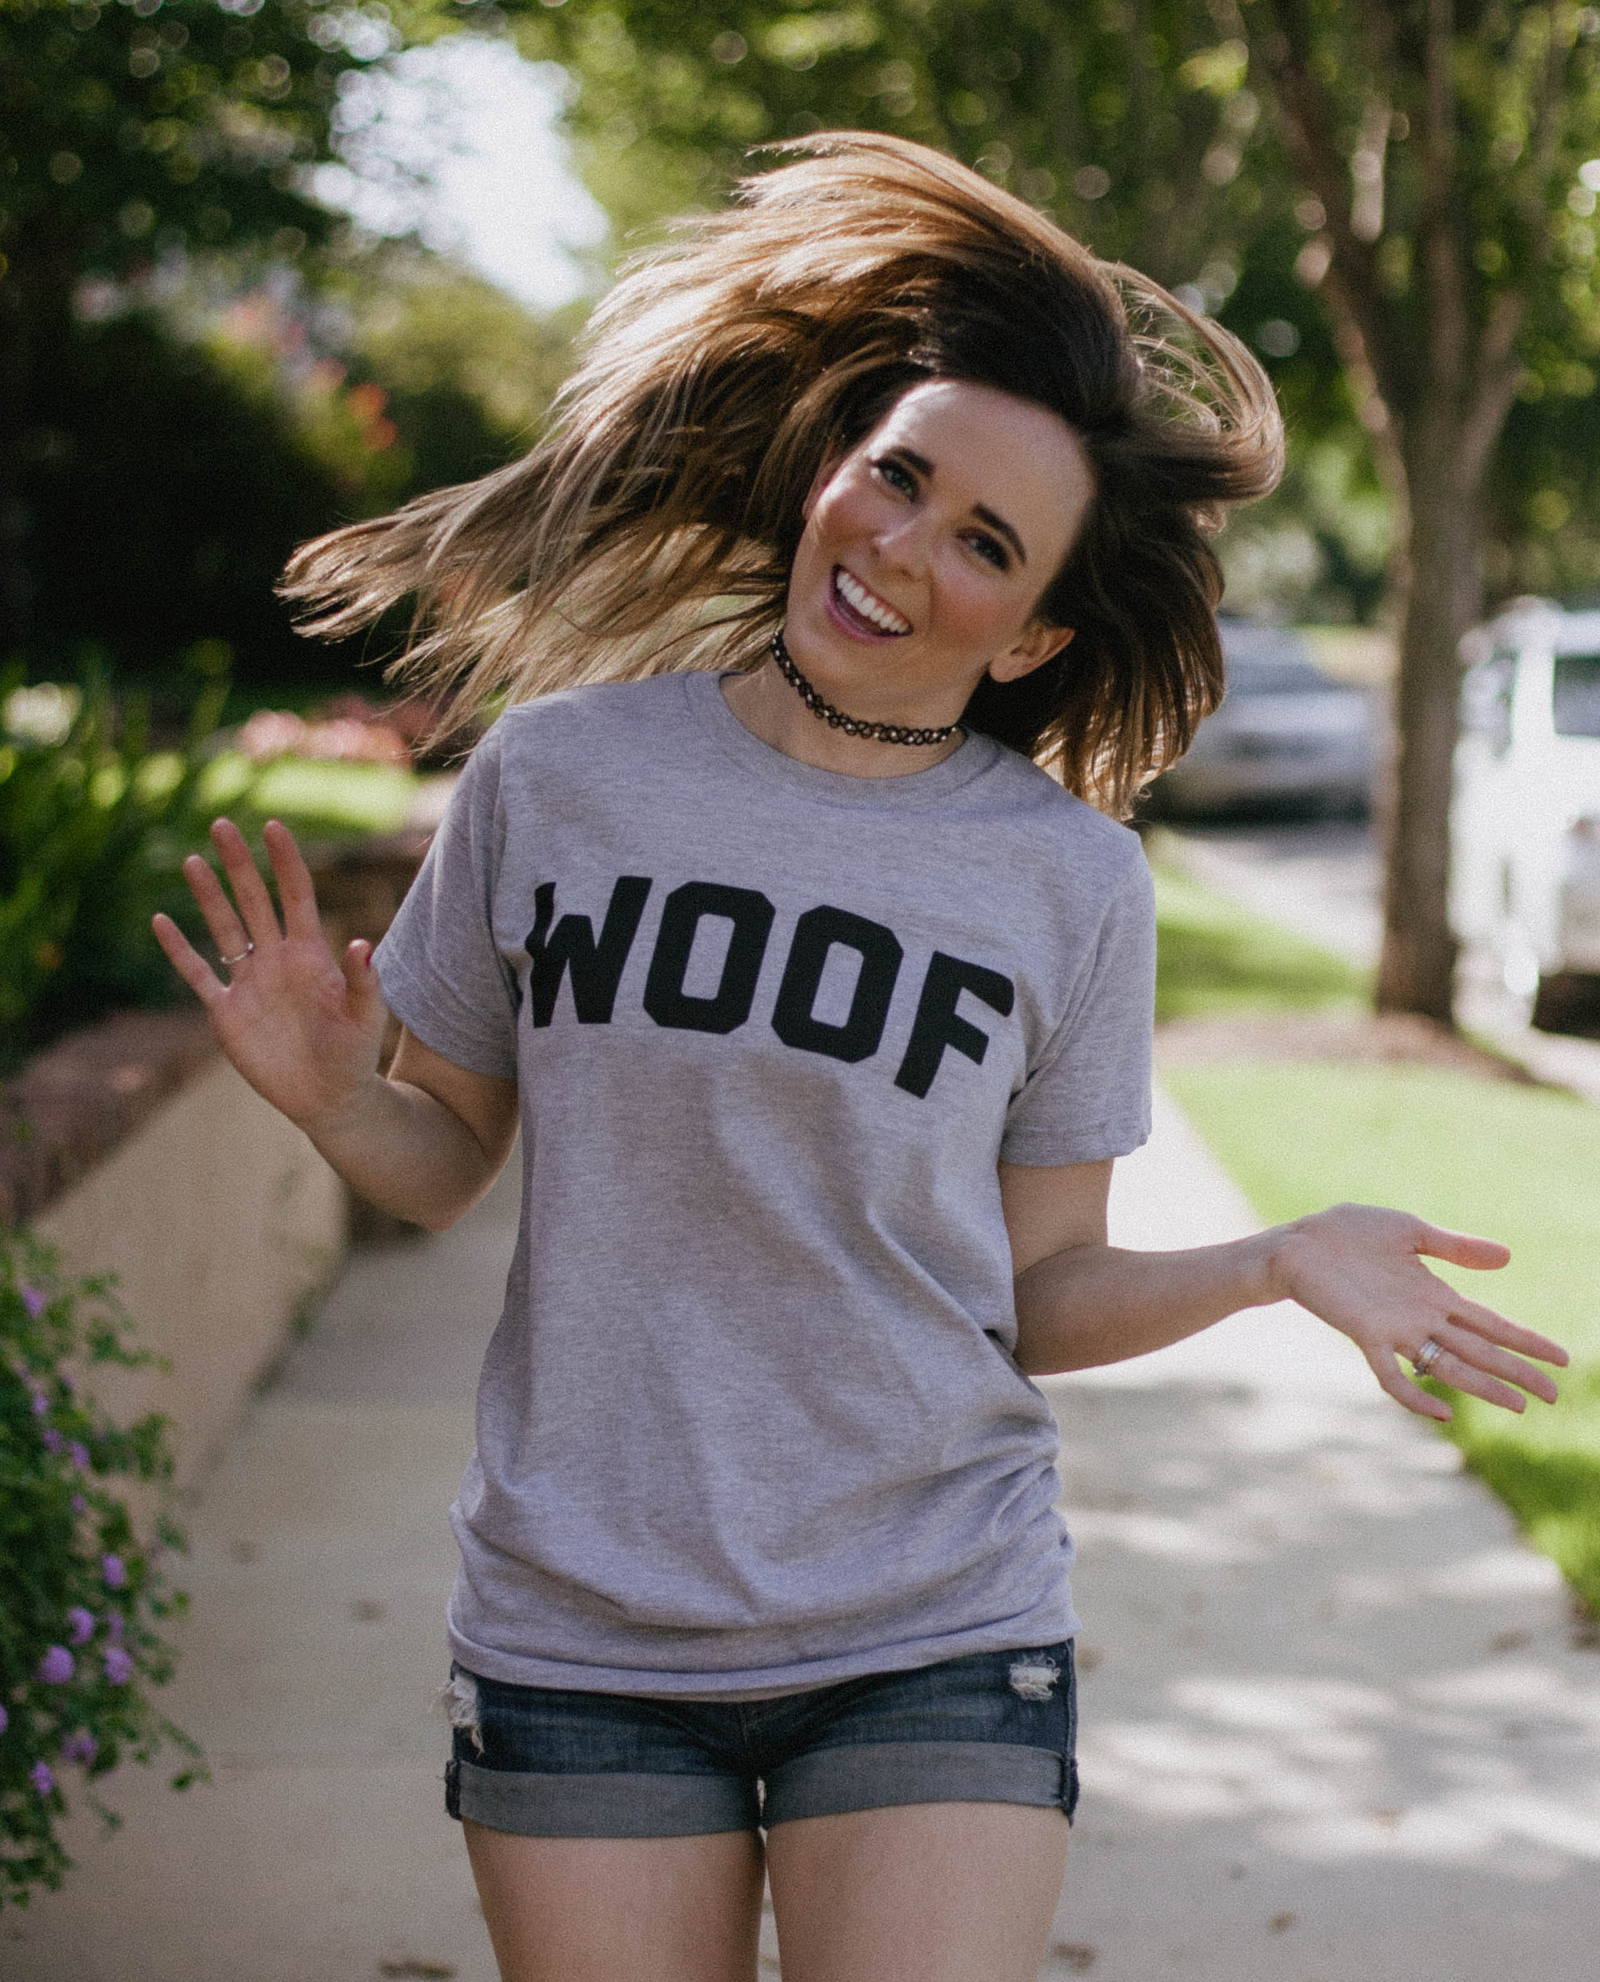 Woman flipping hair and wearing gray WOOF shirt